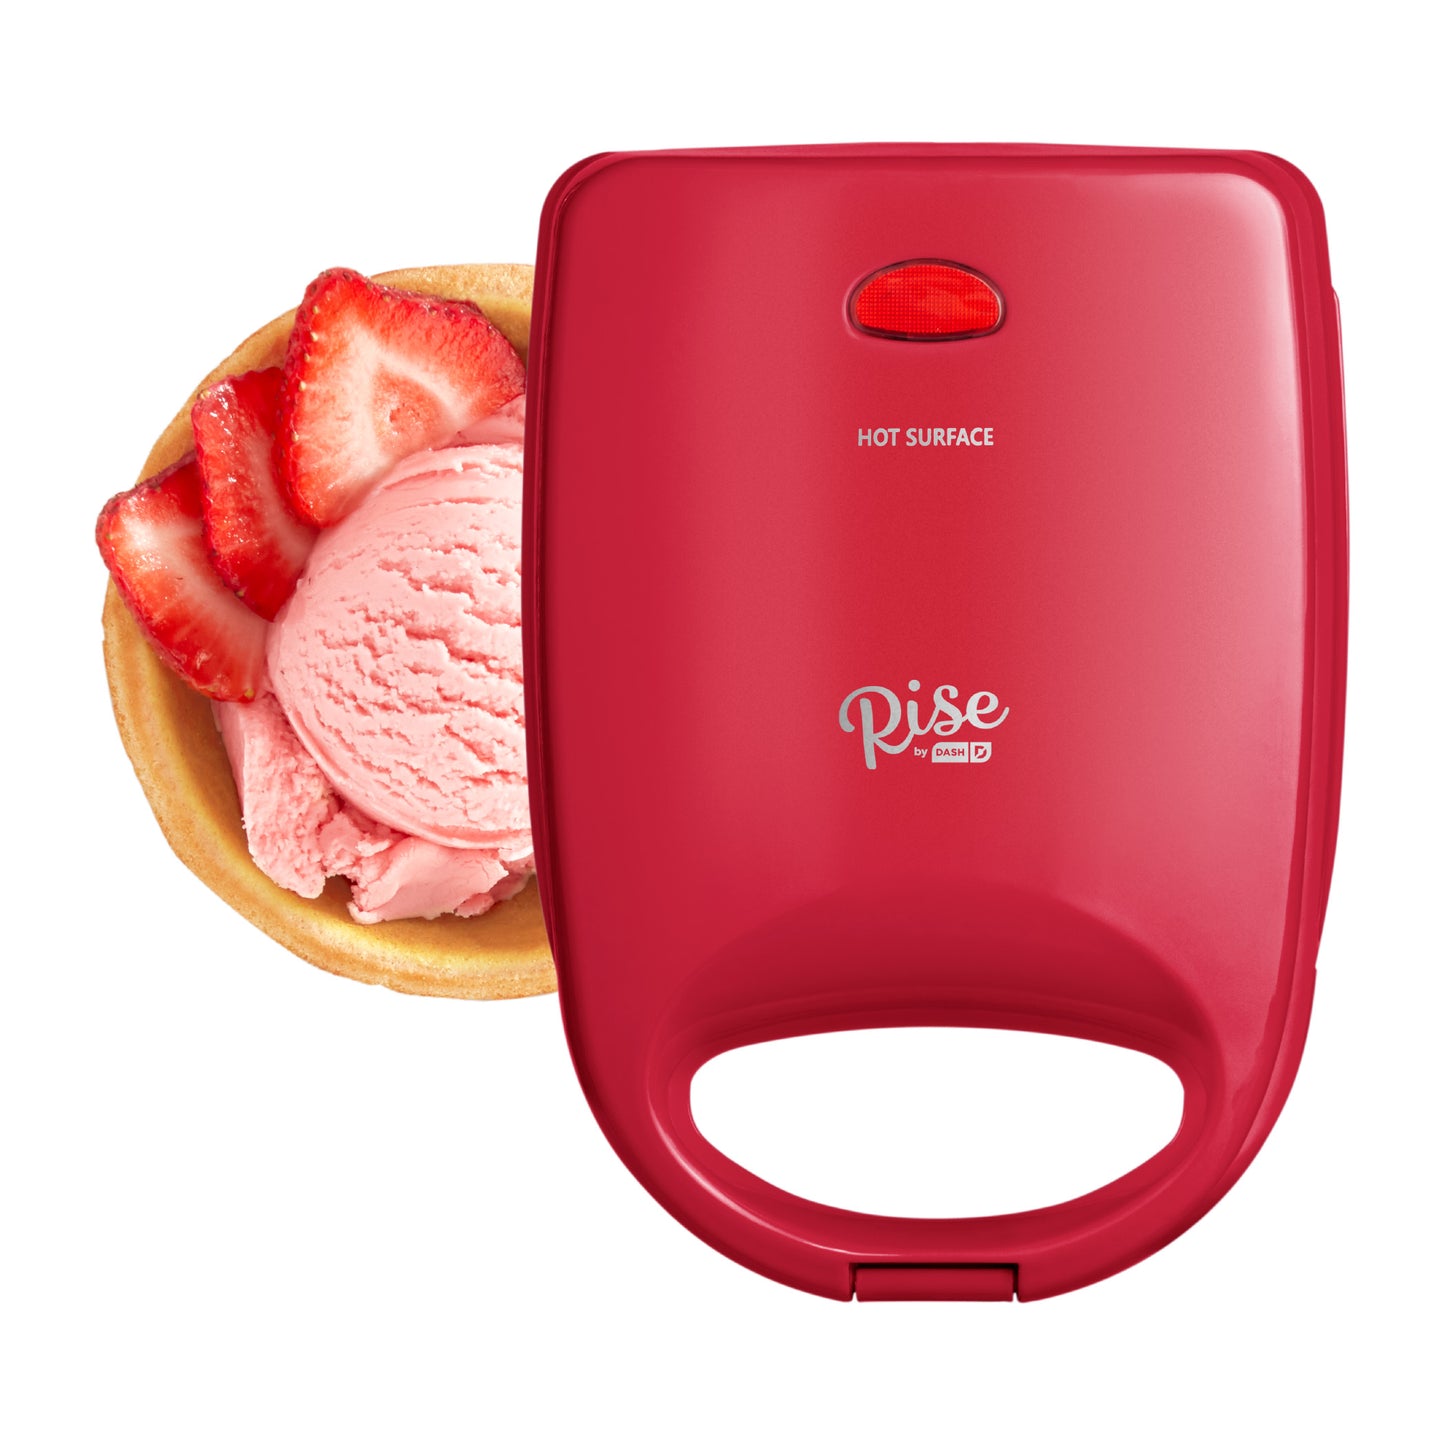 Rise by Dash Waffle Bowl Maker Waffle Maker Rise by Dash   